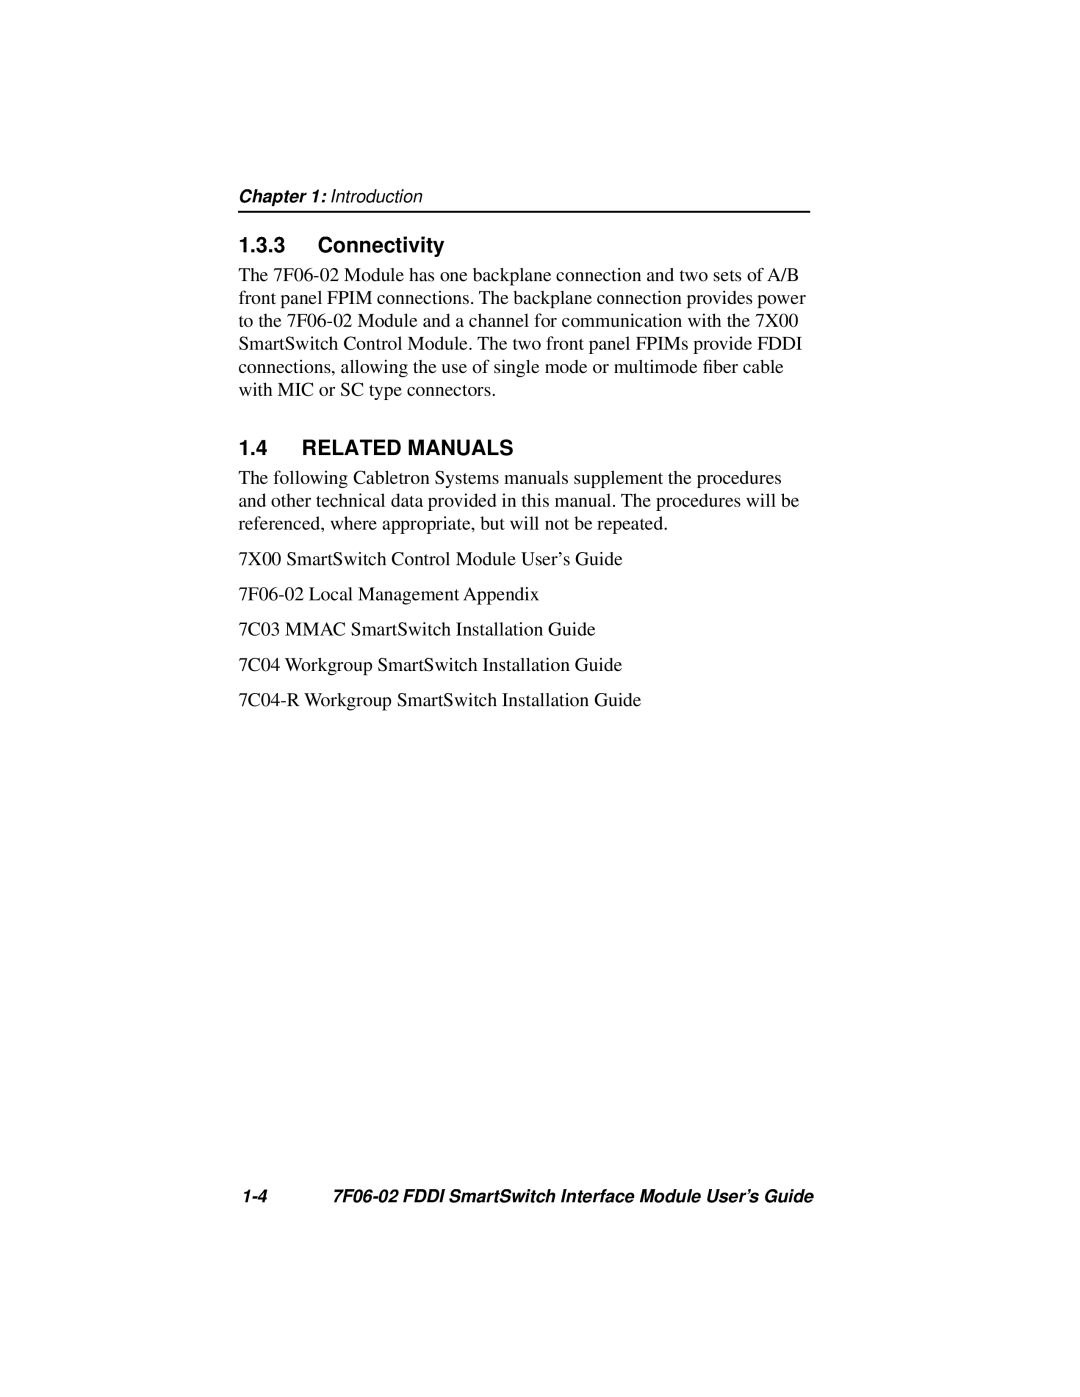 Cabletron Systems FDDI manual Connectivity, Related Manuals 